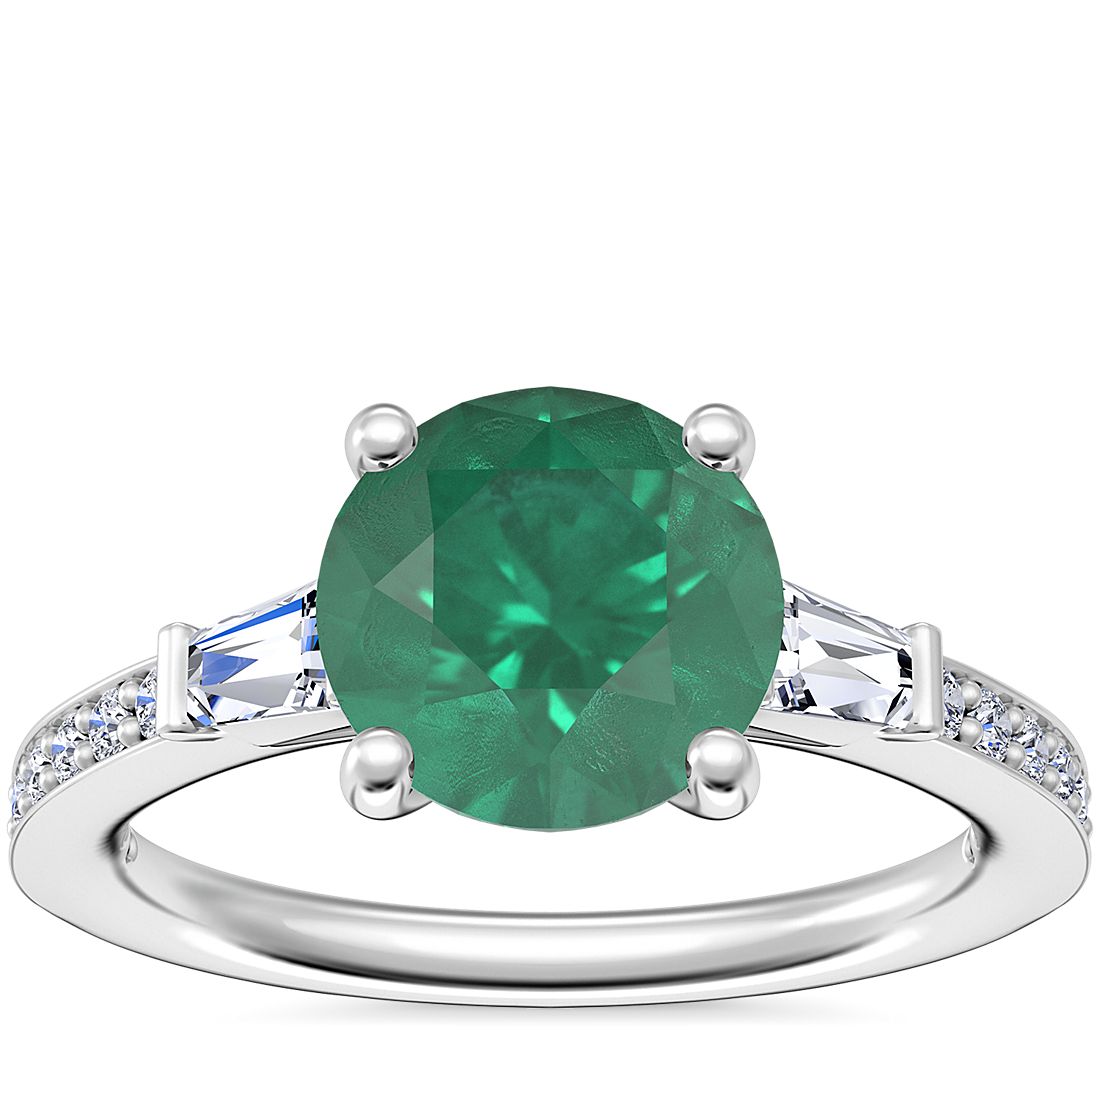 Tapered Baguette Diamond Cathedral Engagement Ringwith Round Emerald in Platinum (8mm)